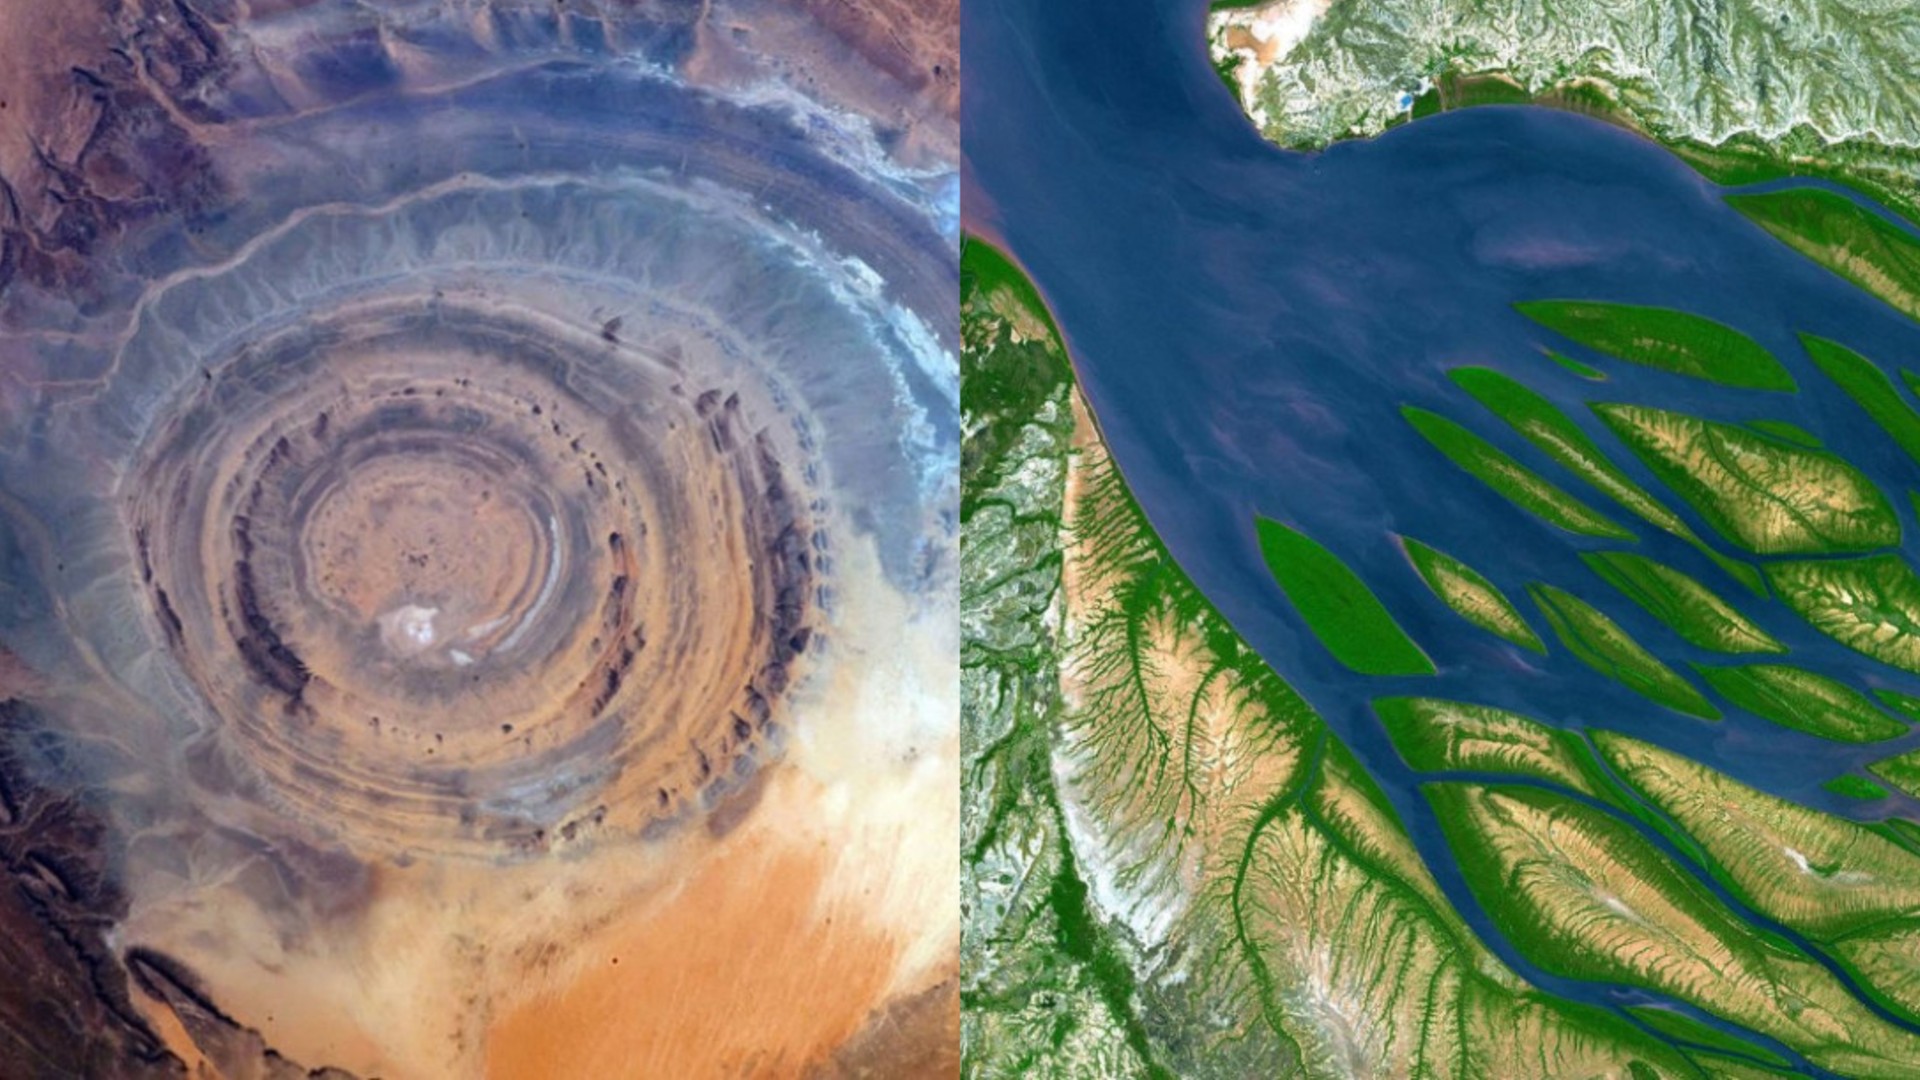 NASA Shares Pictures Of Land, Water, Air On Earth From The Space And Netizens Are In Awe